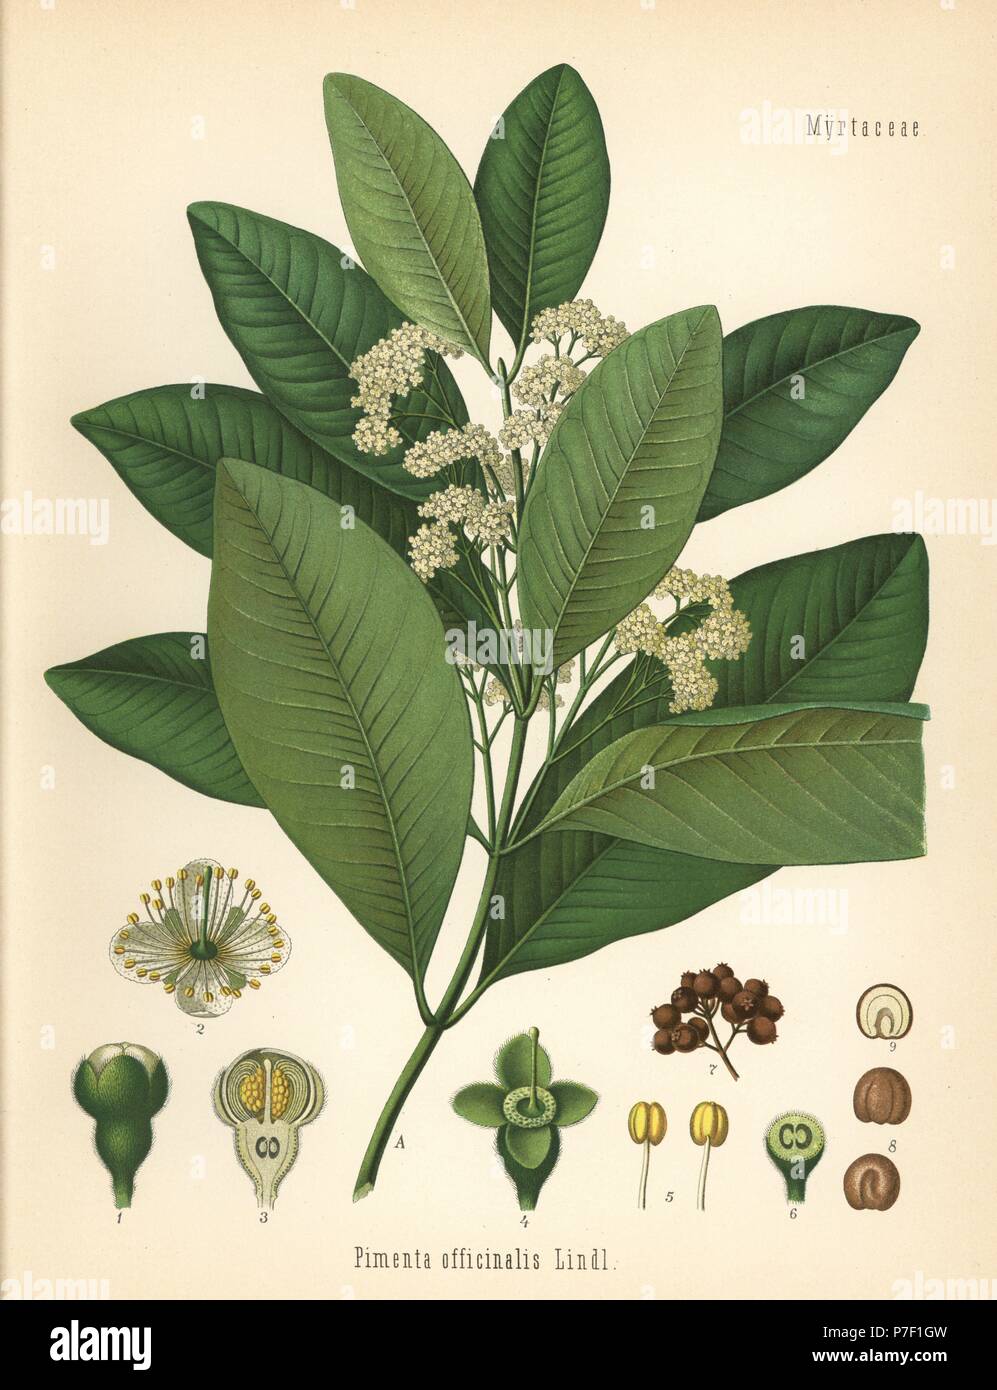 Allspice or Jamaica pepper, Pimenta officinalis. Chromolithograph after a botanical illustration from Hermann Adolph Koehler's Medicinal Plants, edited by Gustav Pabst, Koehler, Germany, 1887. Stock Photo